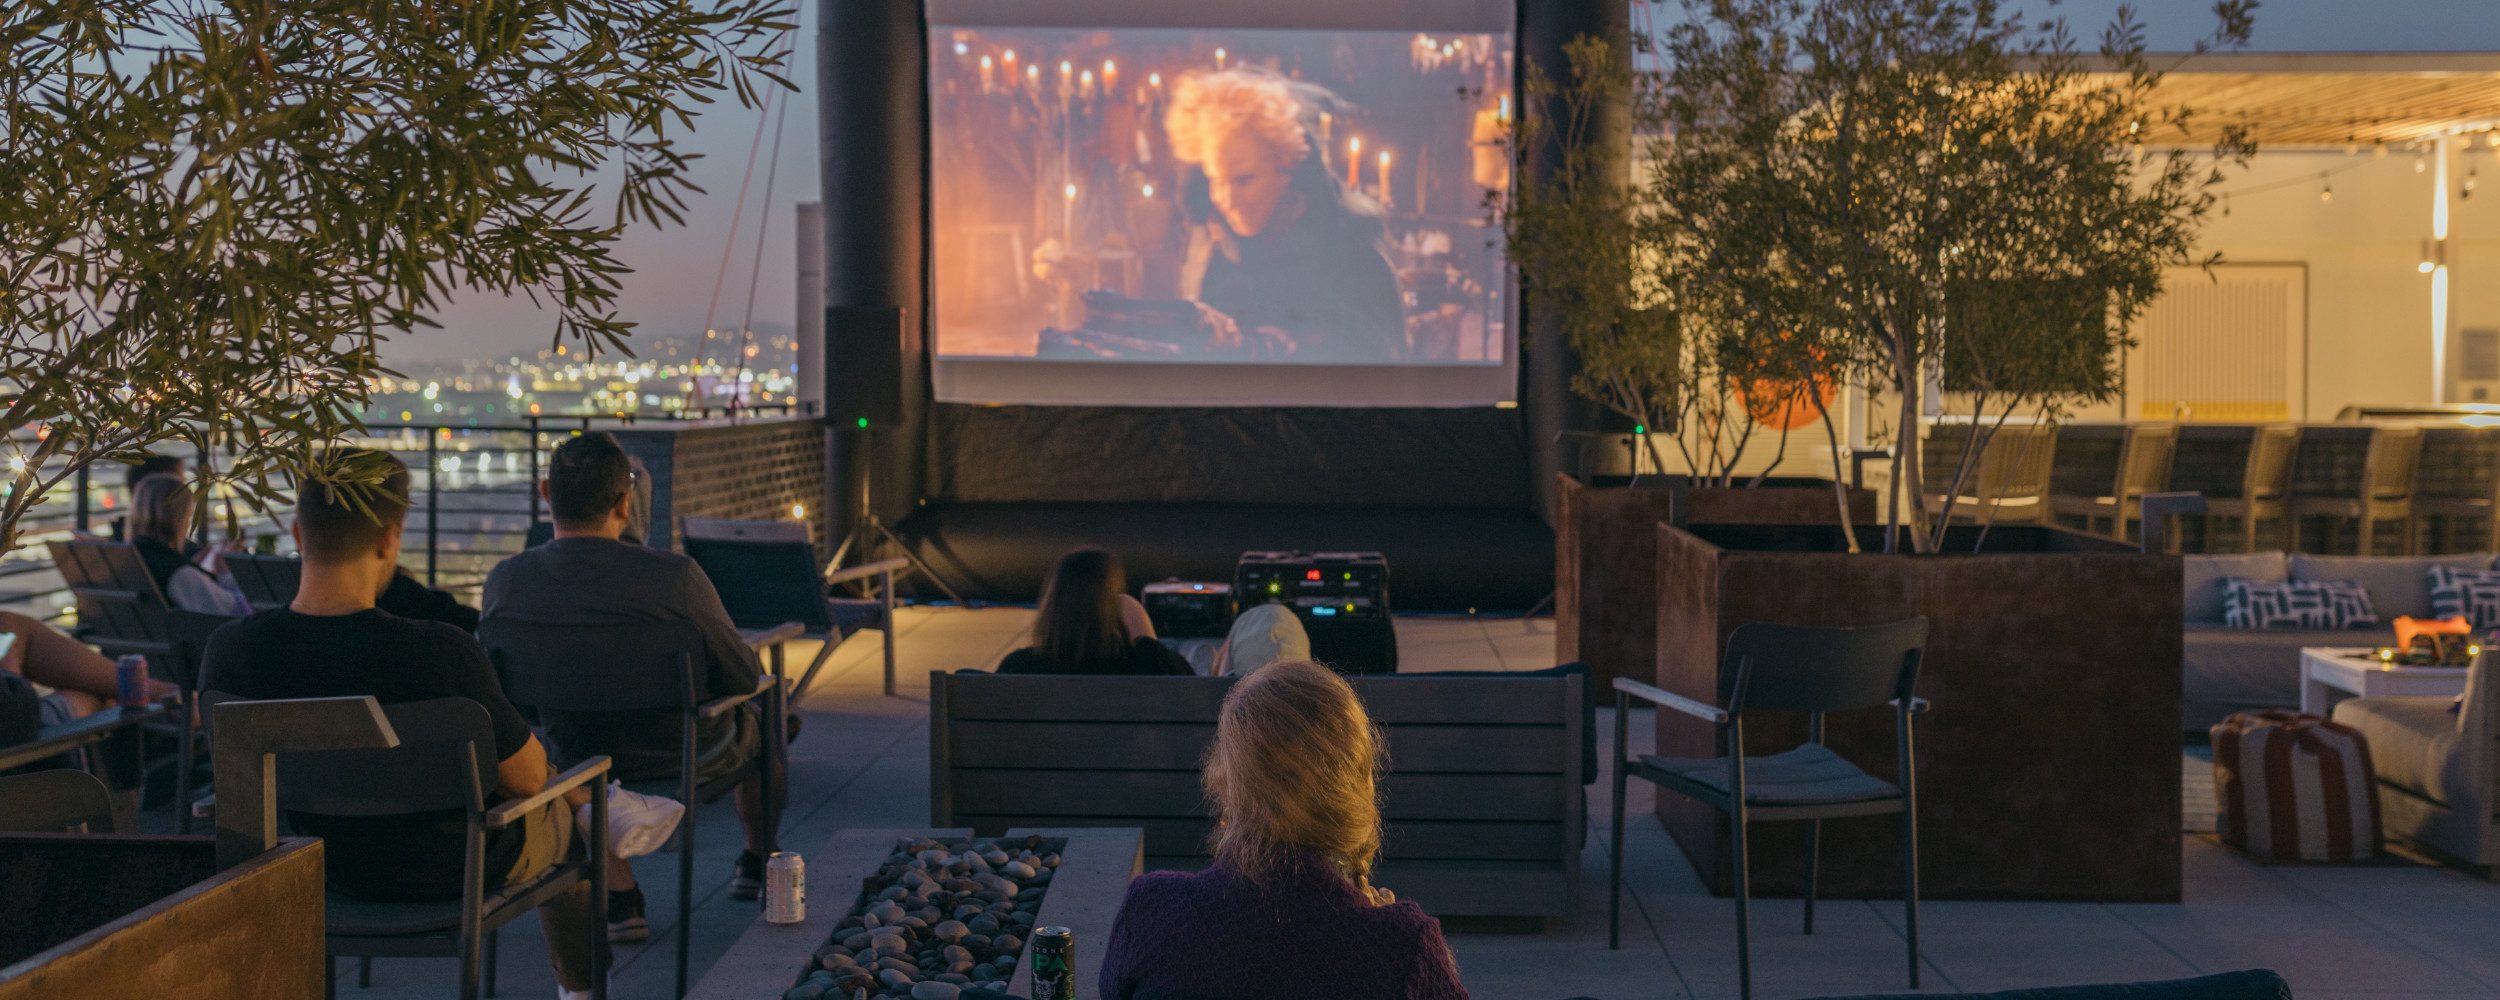 New-York-outdoor-movie-party